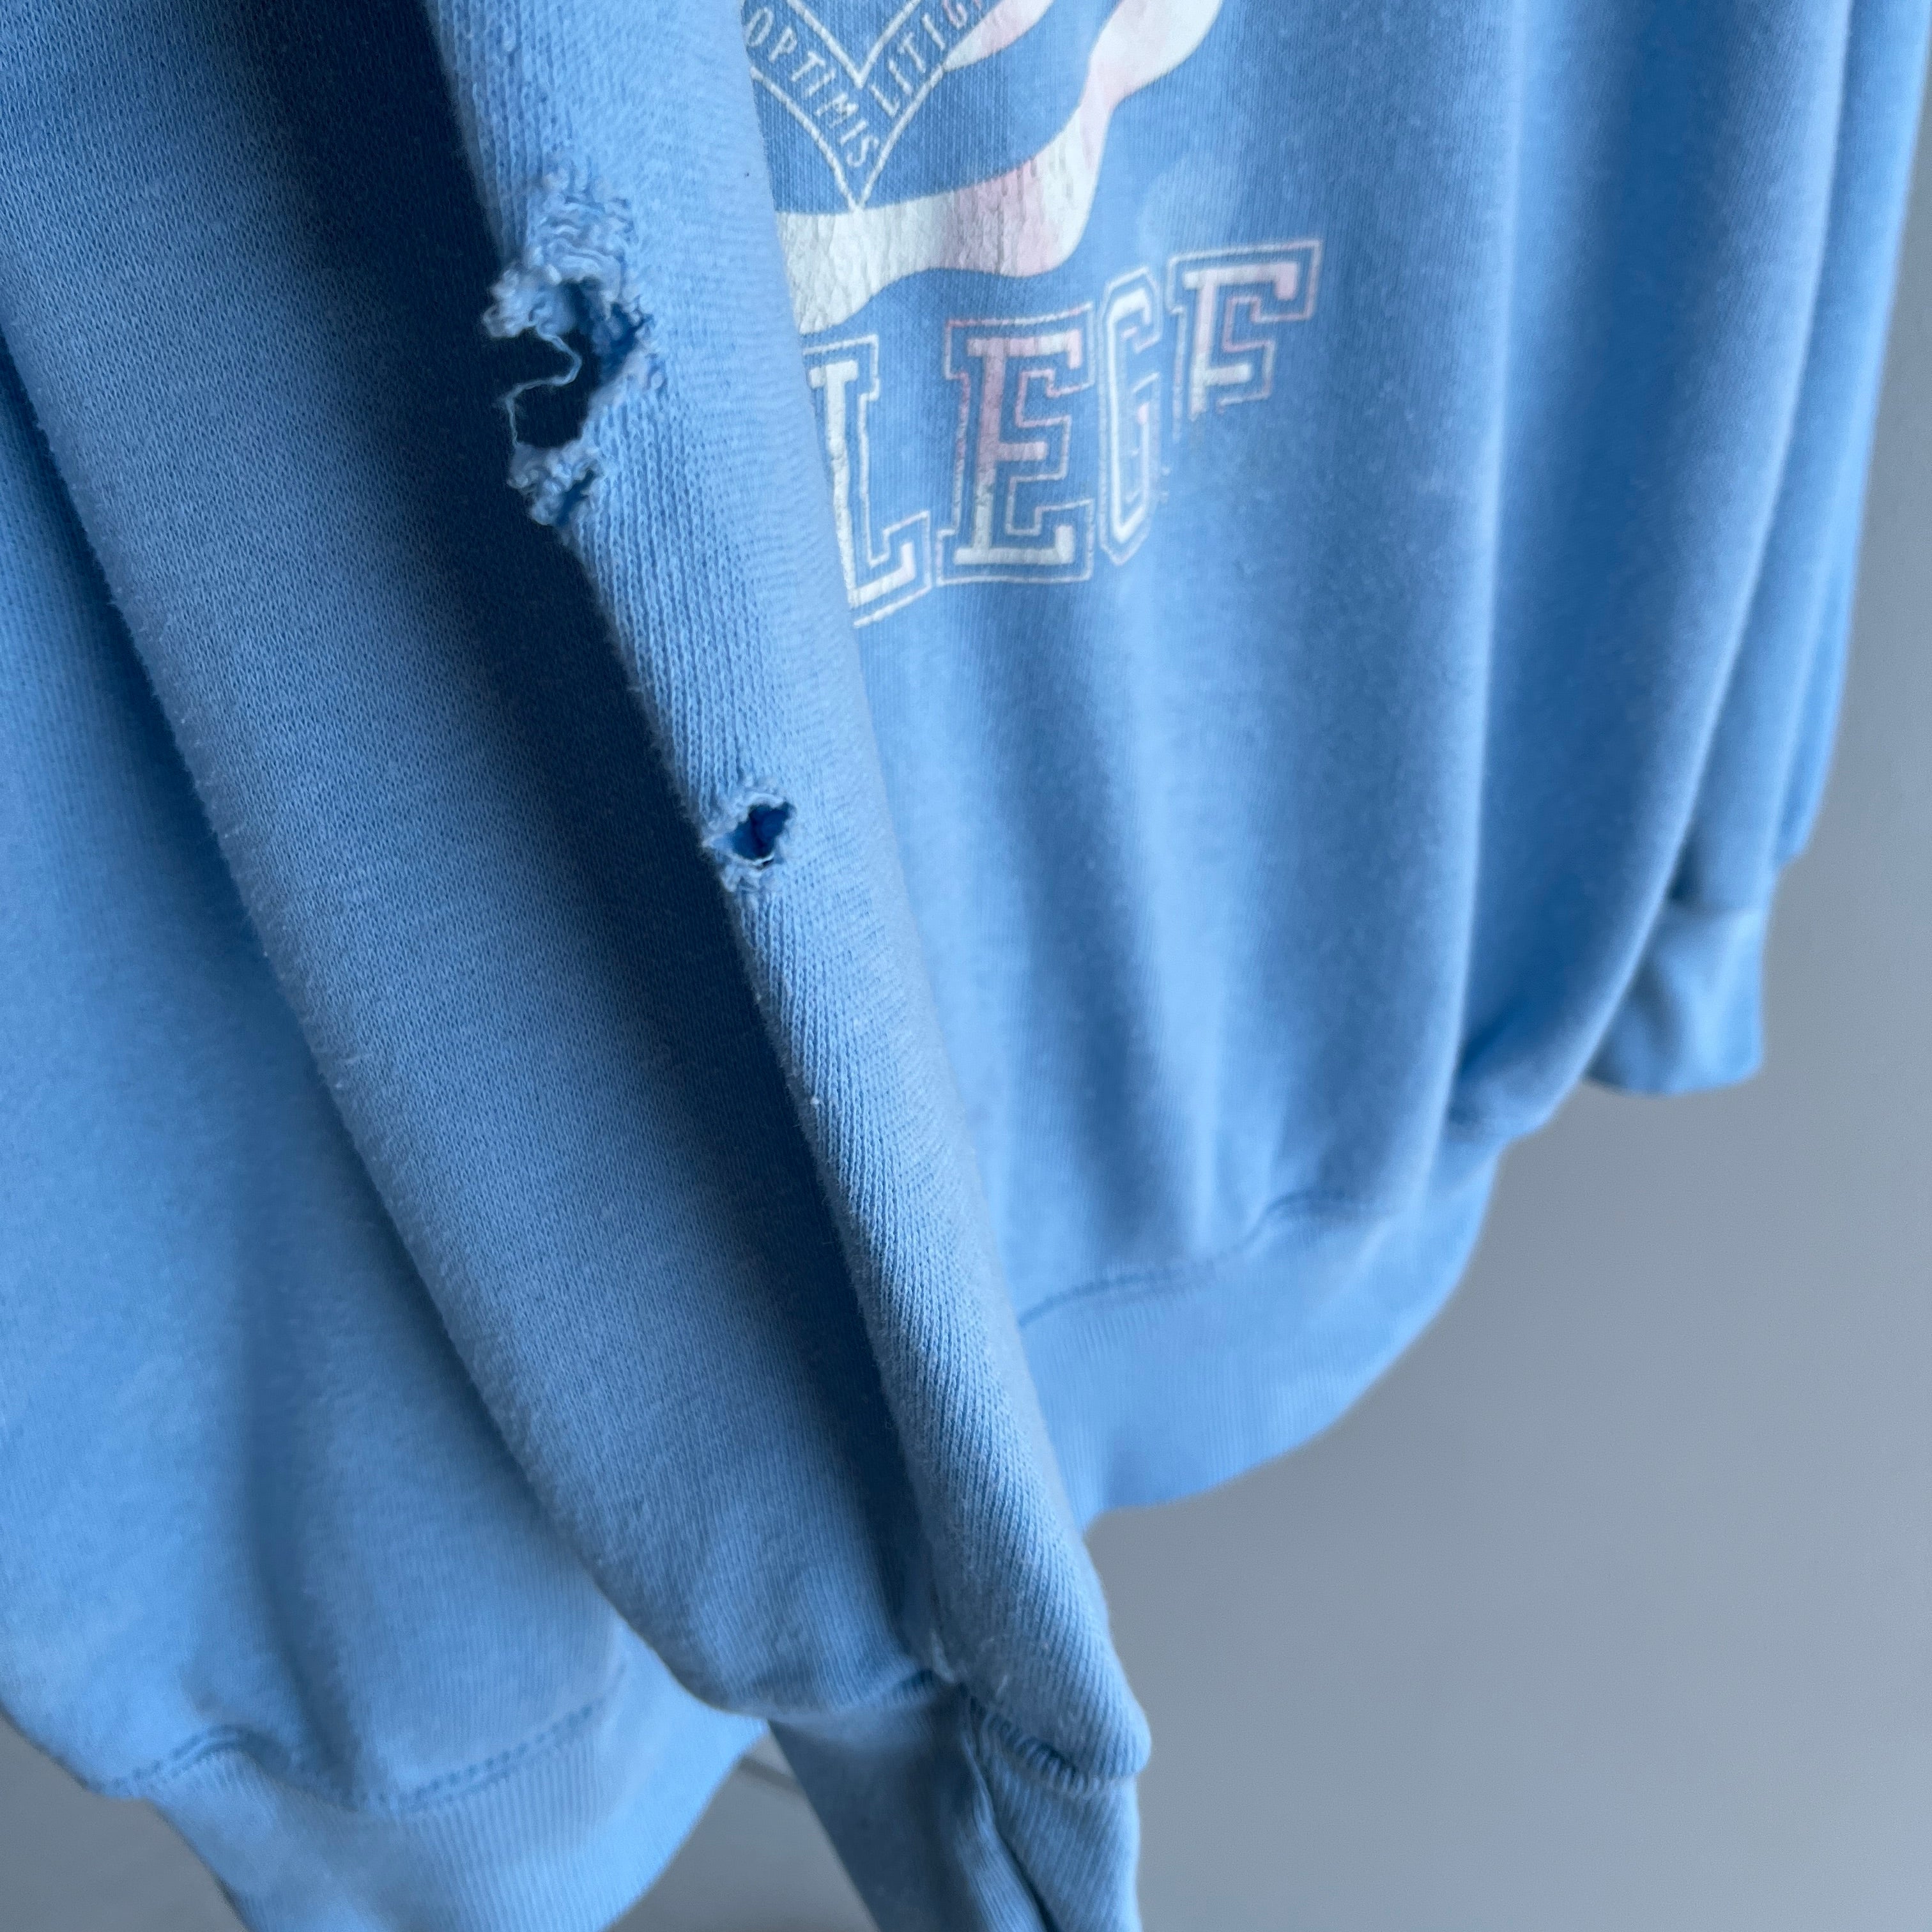 1970s Marist College Stained and Worn Sweatshirt - Holes